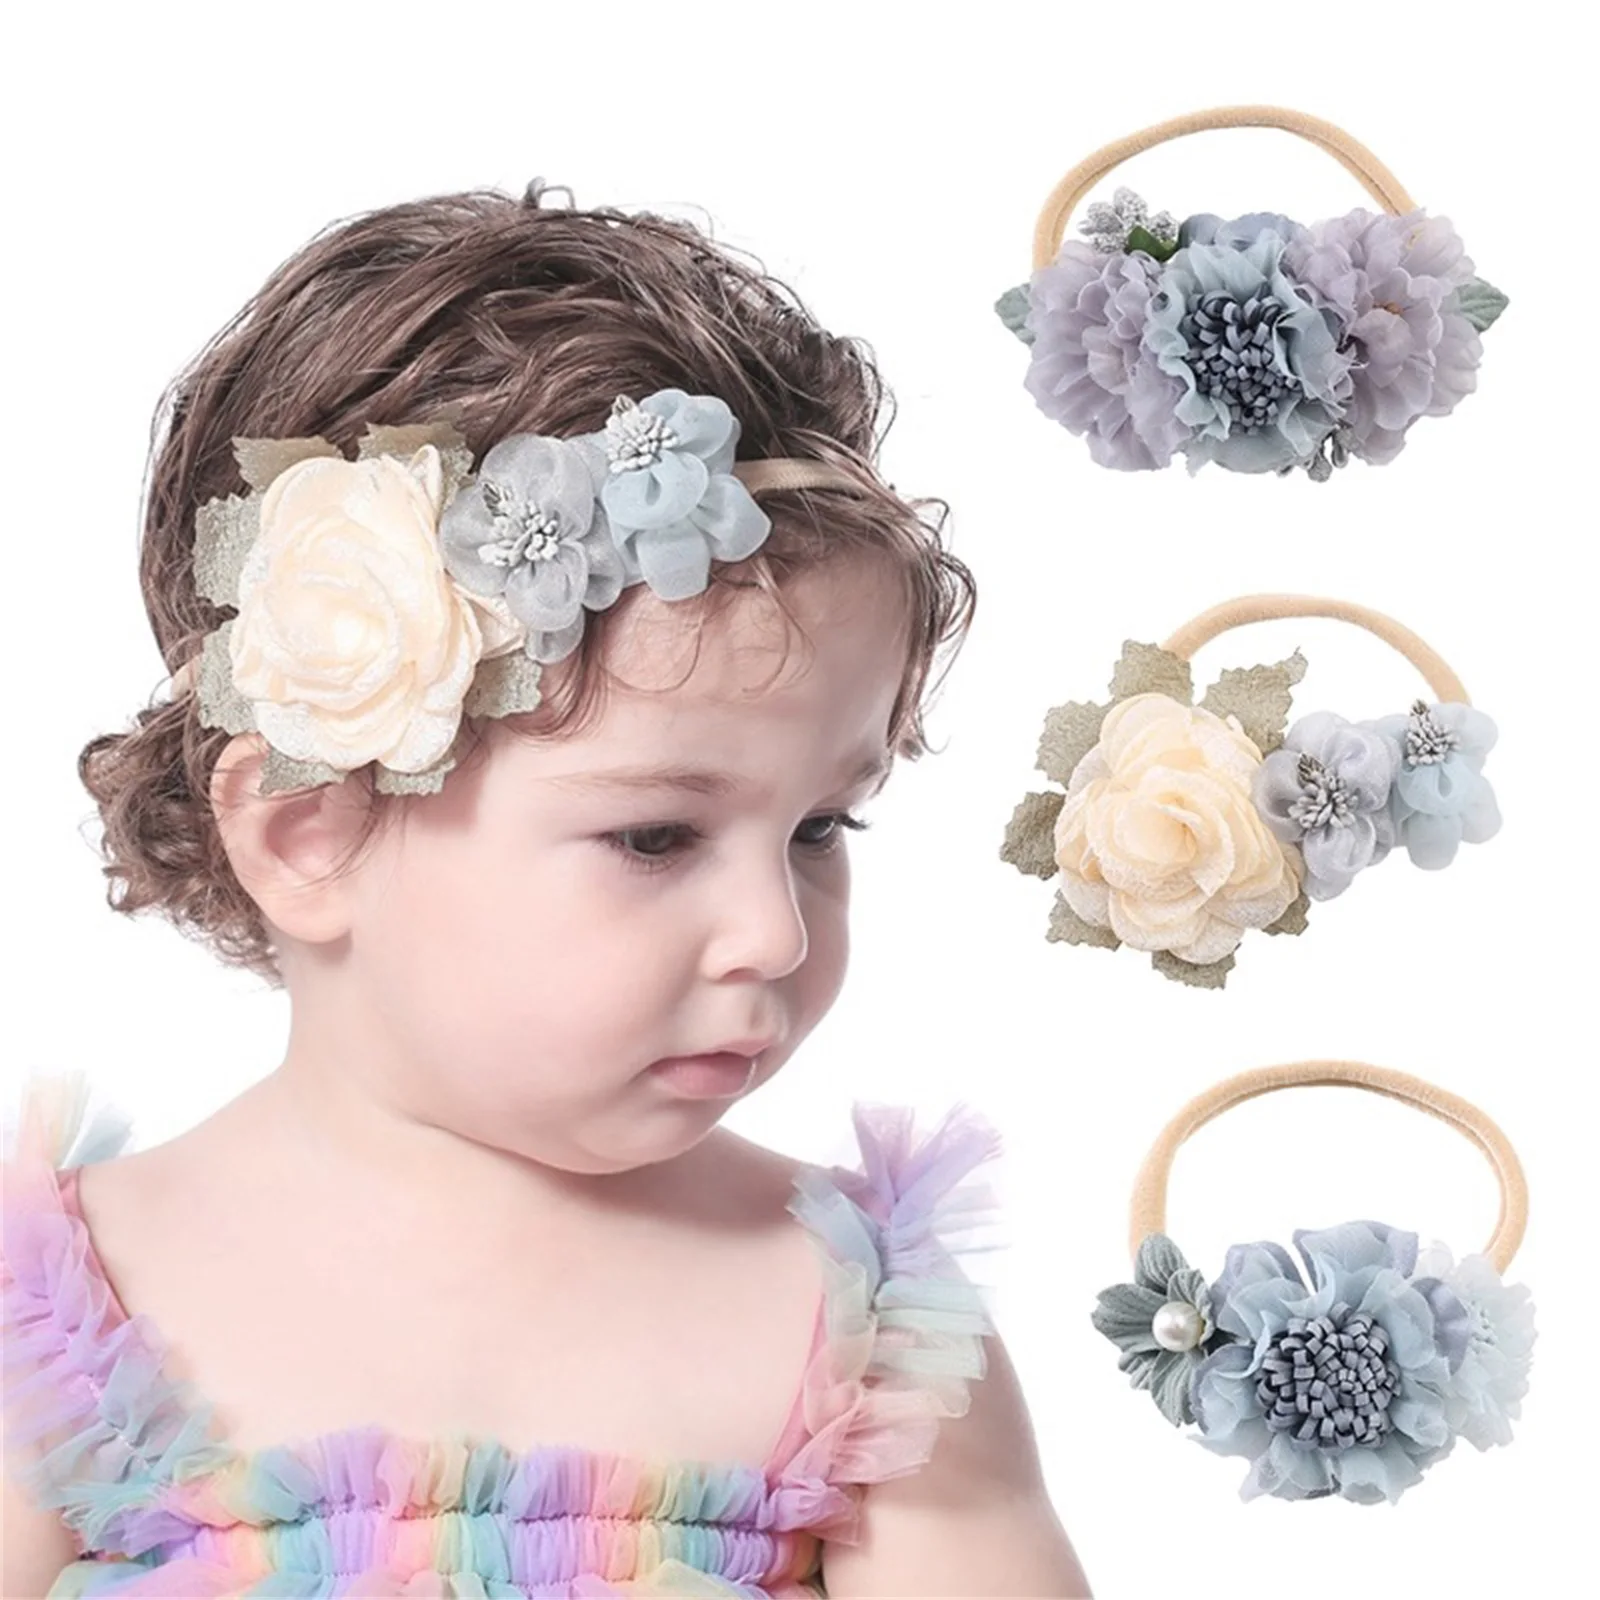 EWODOS Toddler Newborn Baby Girls Nylon Headbands Soft Infant Flower Hairbands Hair Bows Accessories for Home Party Wedding